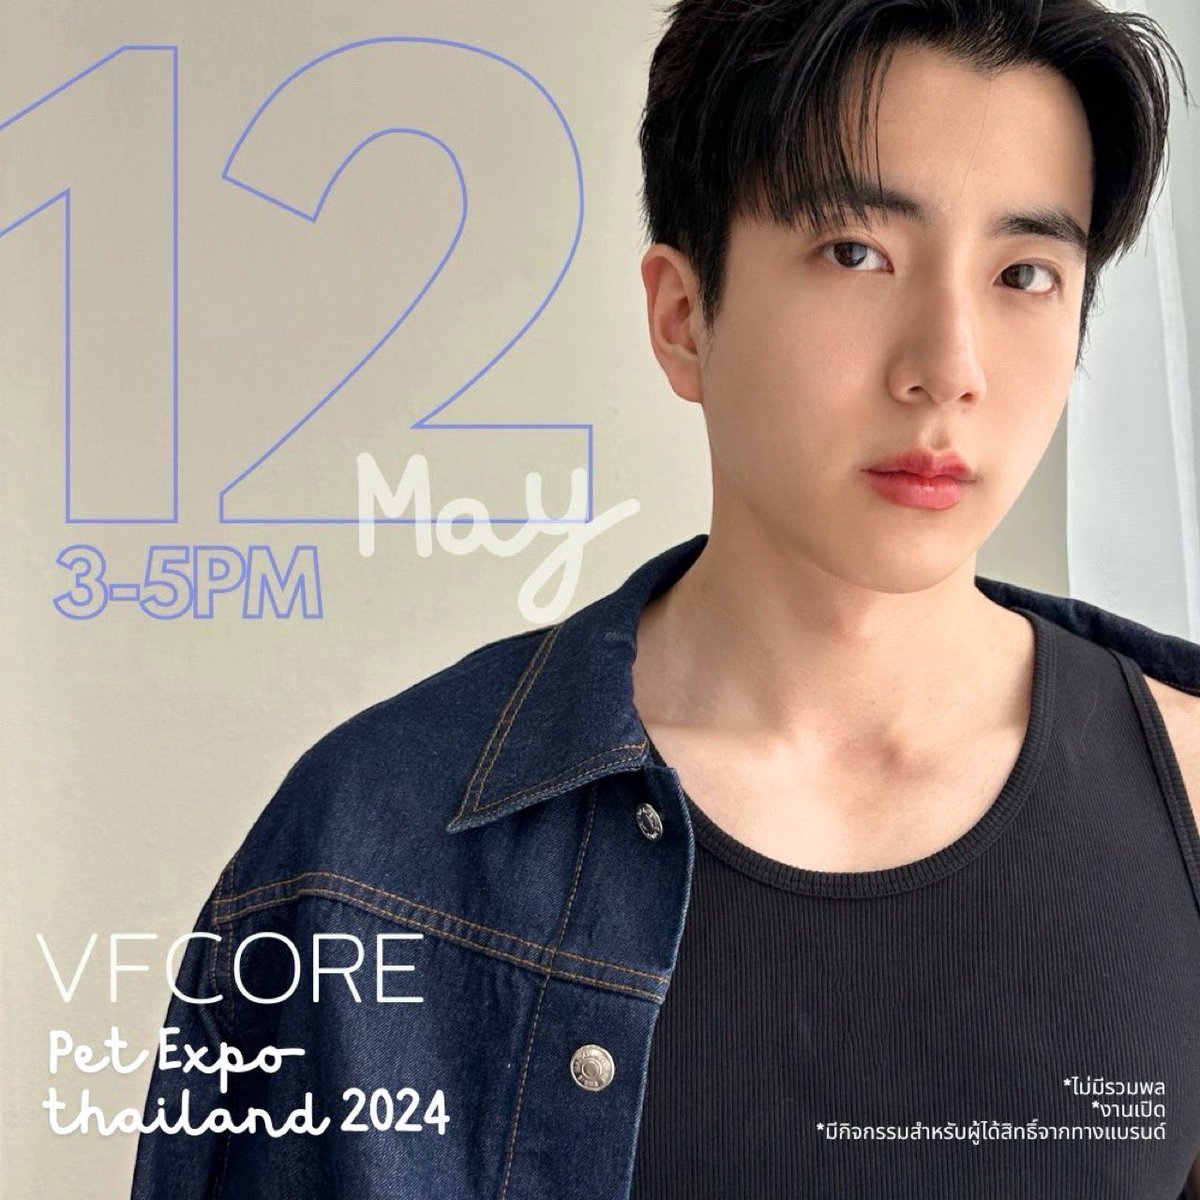 See you there 🍀💚

#nonkul
#nonkulofficial 
#นนกุล